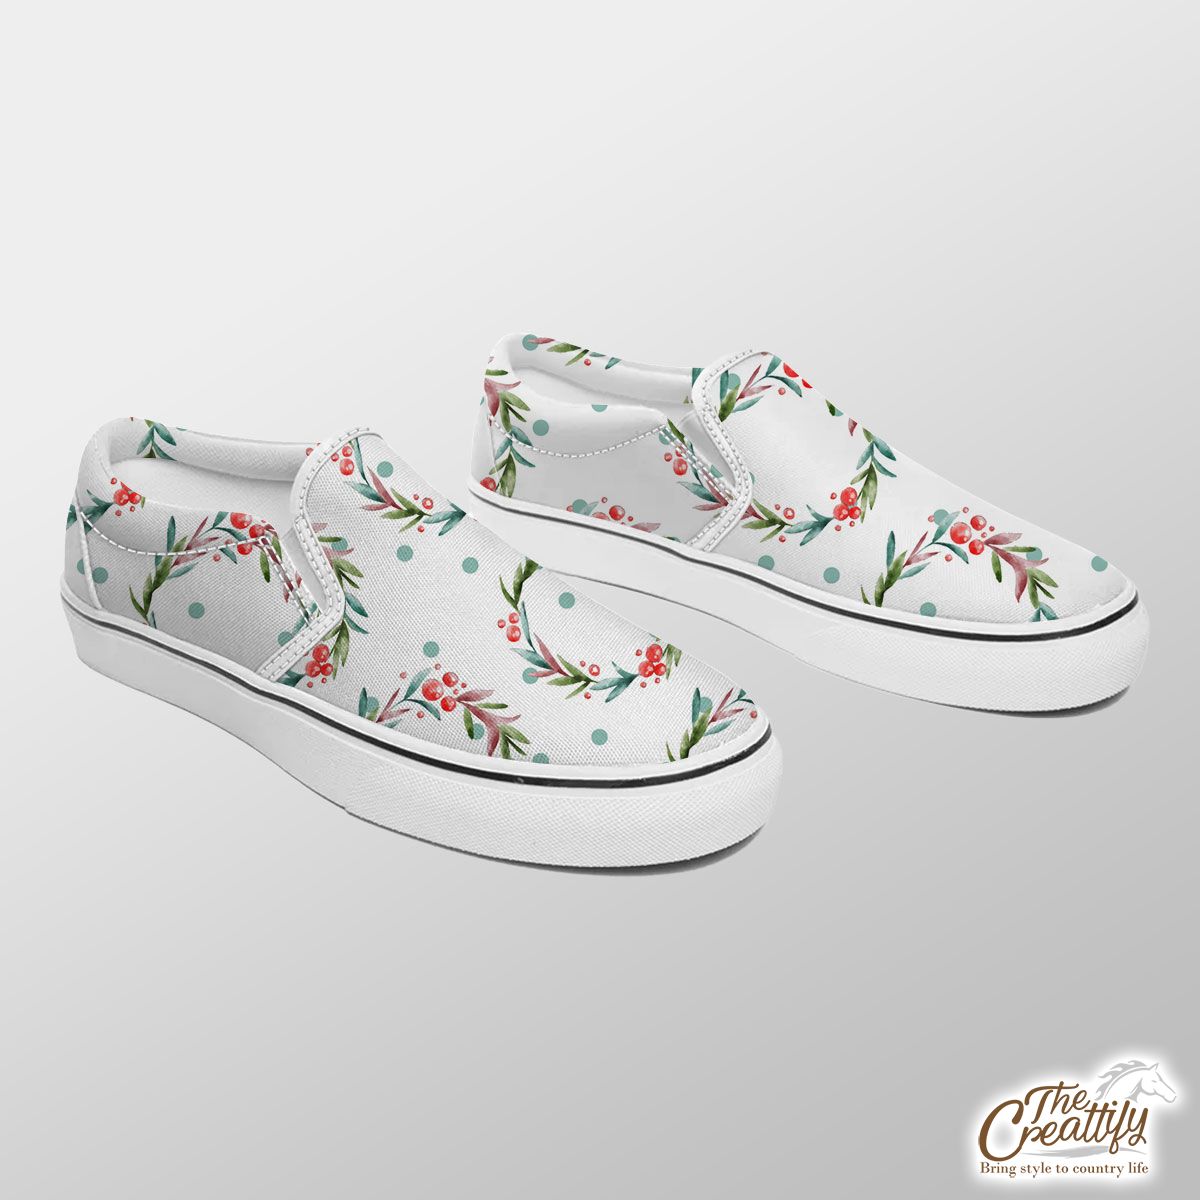 Christmas Wreath On White Background Slip On Sneakers